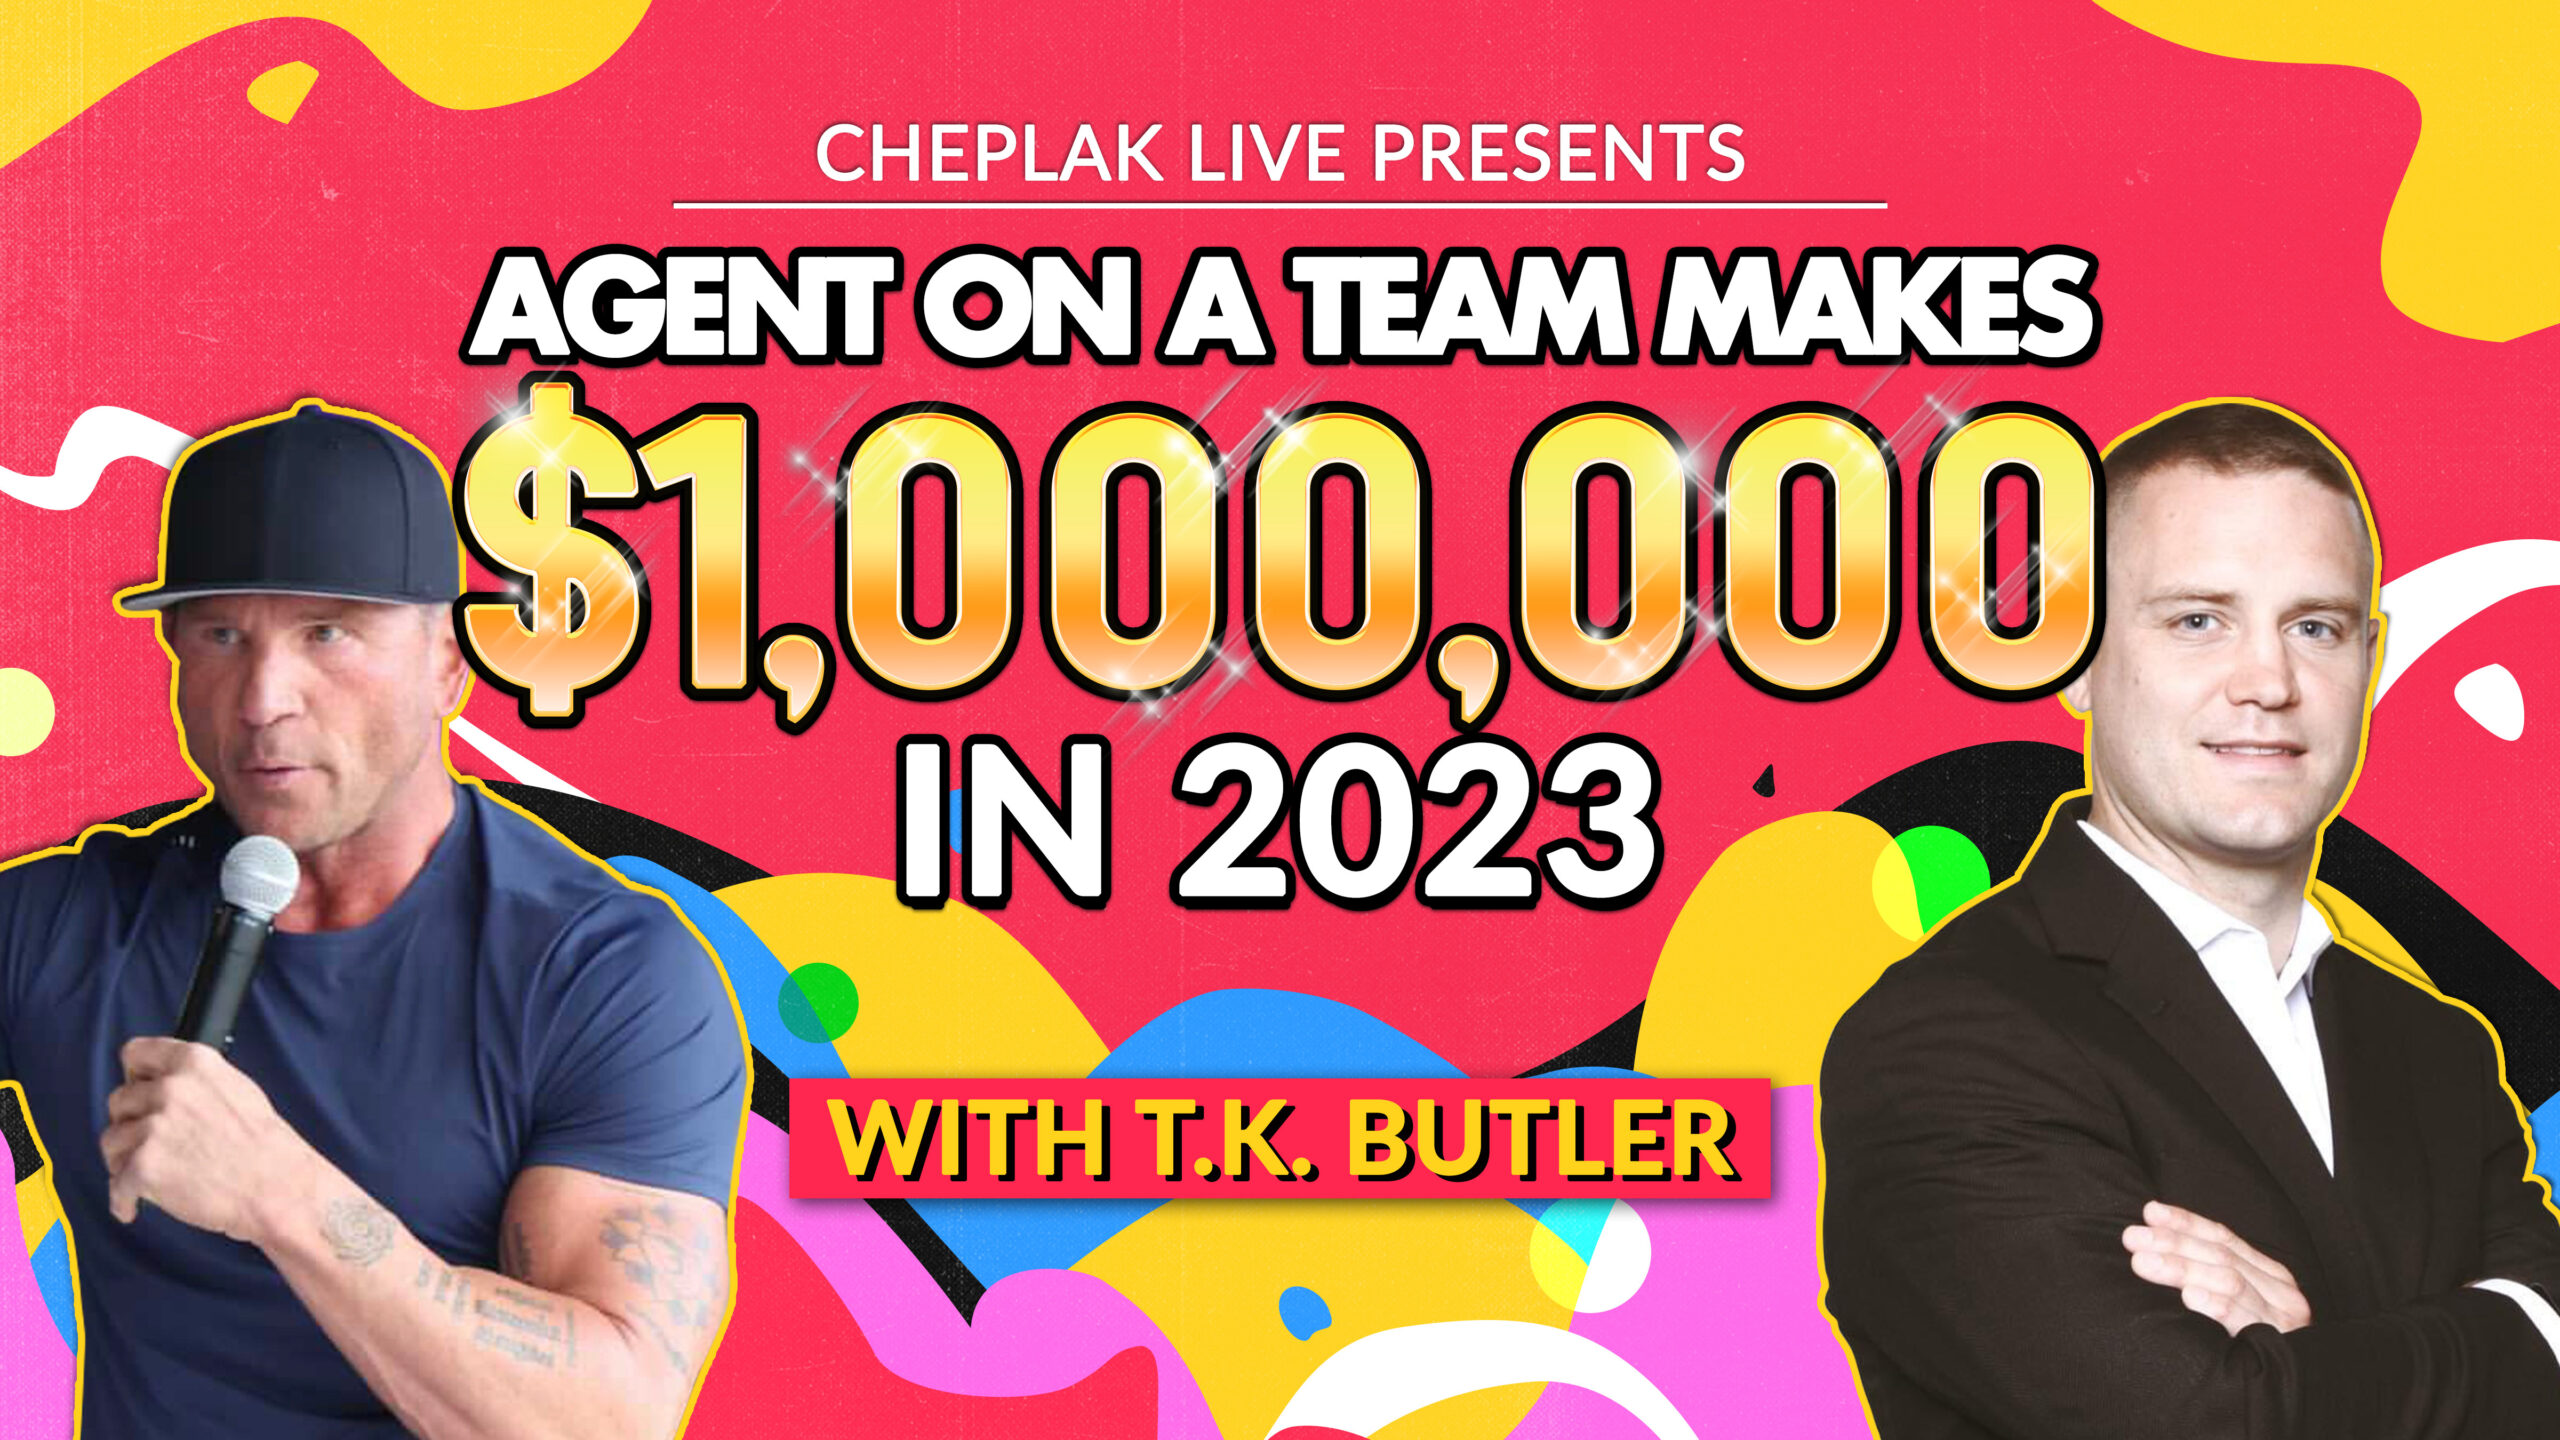 Agent On A Team Makes $1,000,000 in 2023